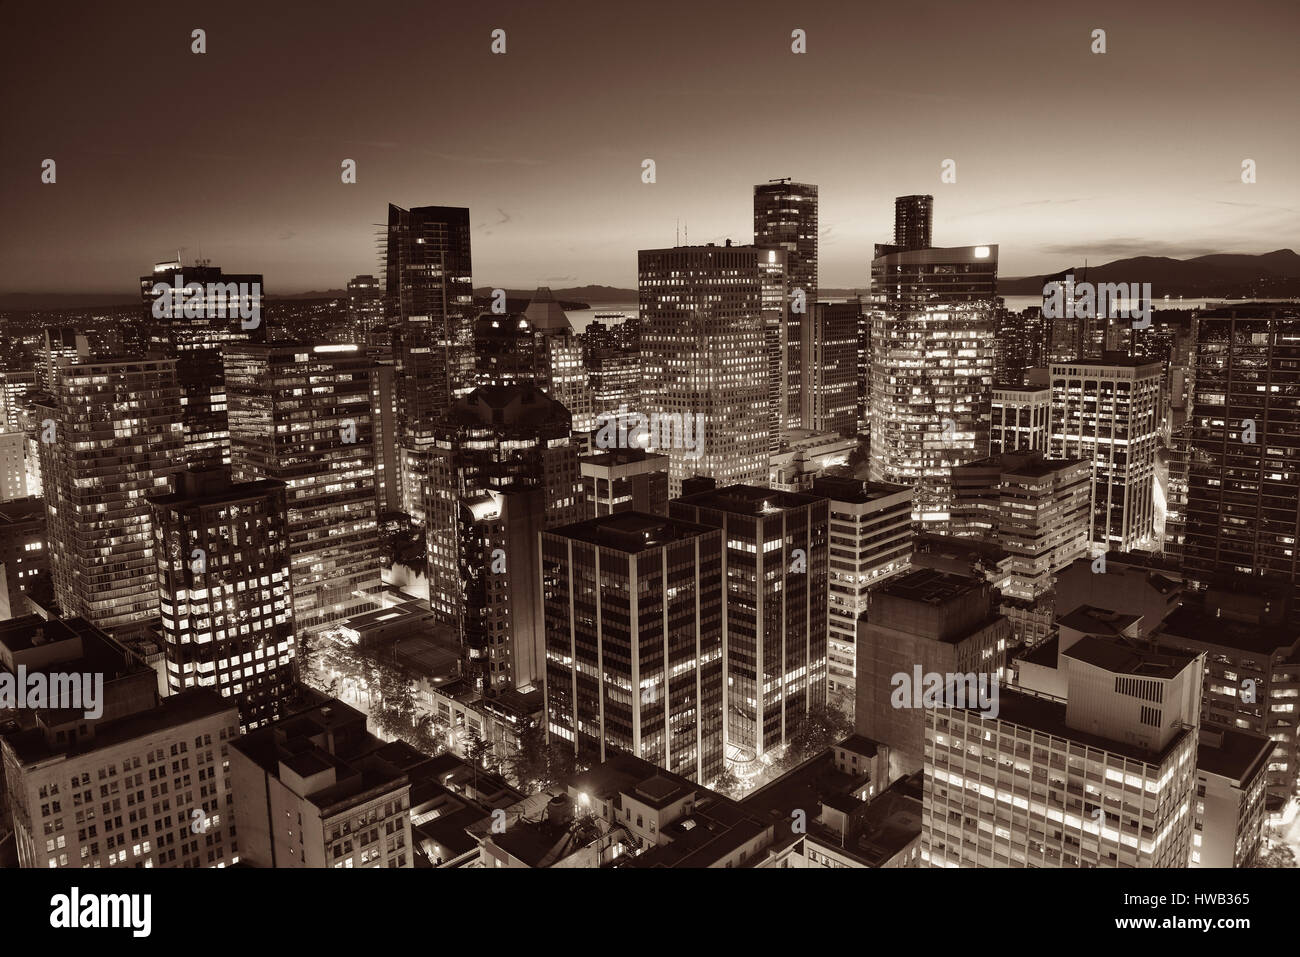 Vancouver rooftop view with urban architectures at dusk. Stock Photo